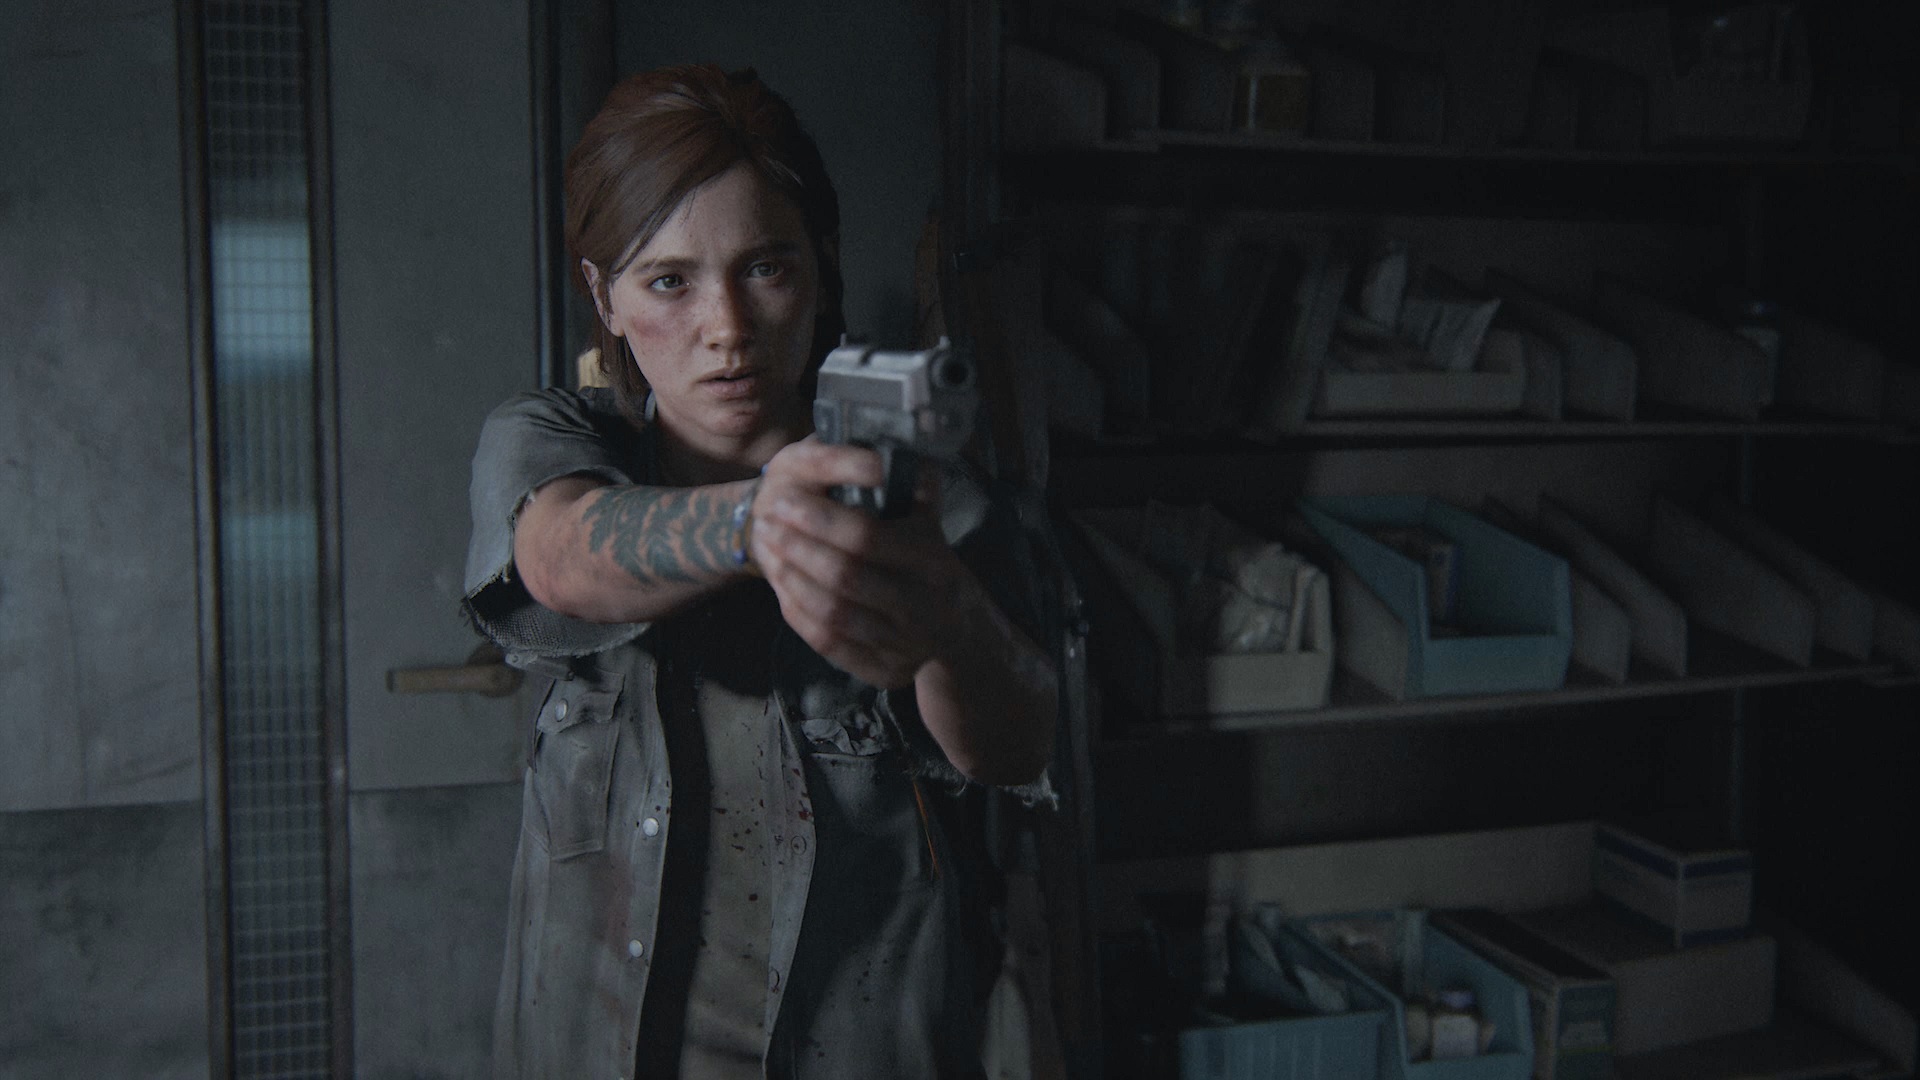 Last of Us Part 3 might not happen, says Naughty Dog's Neil